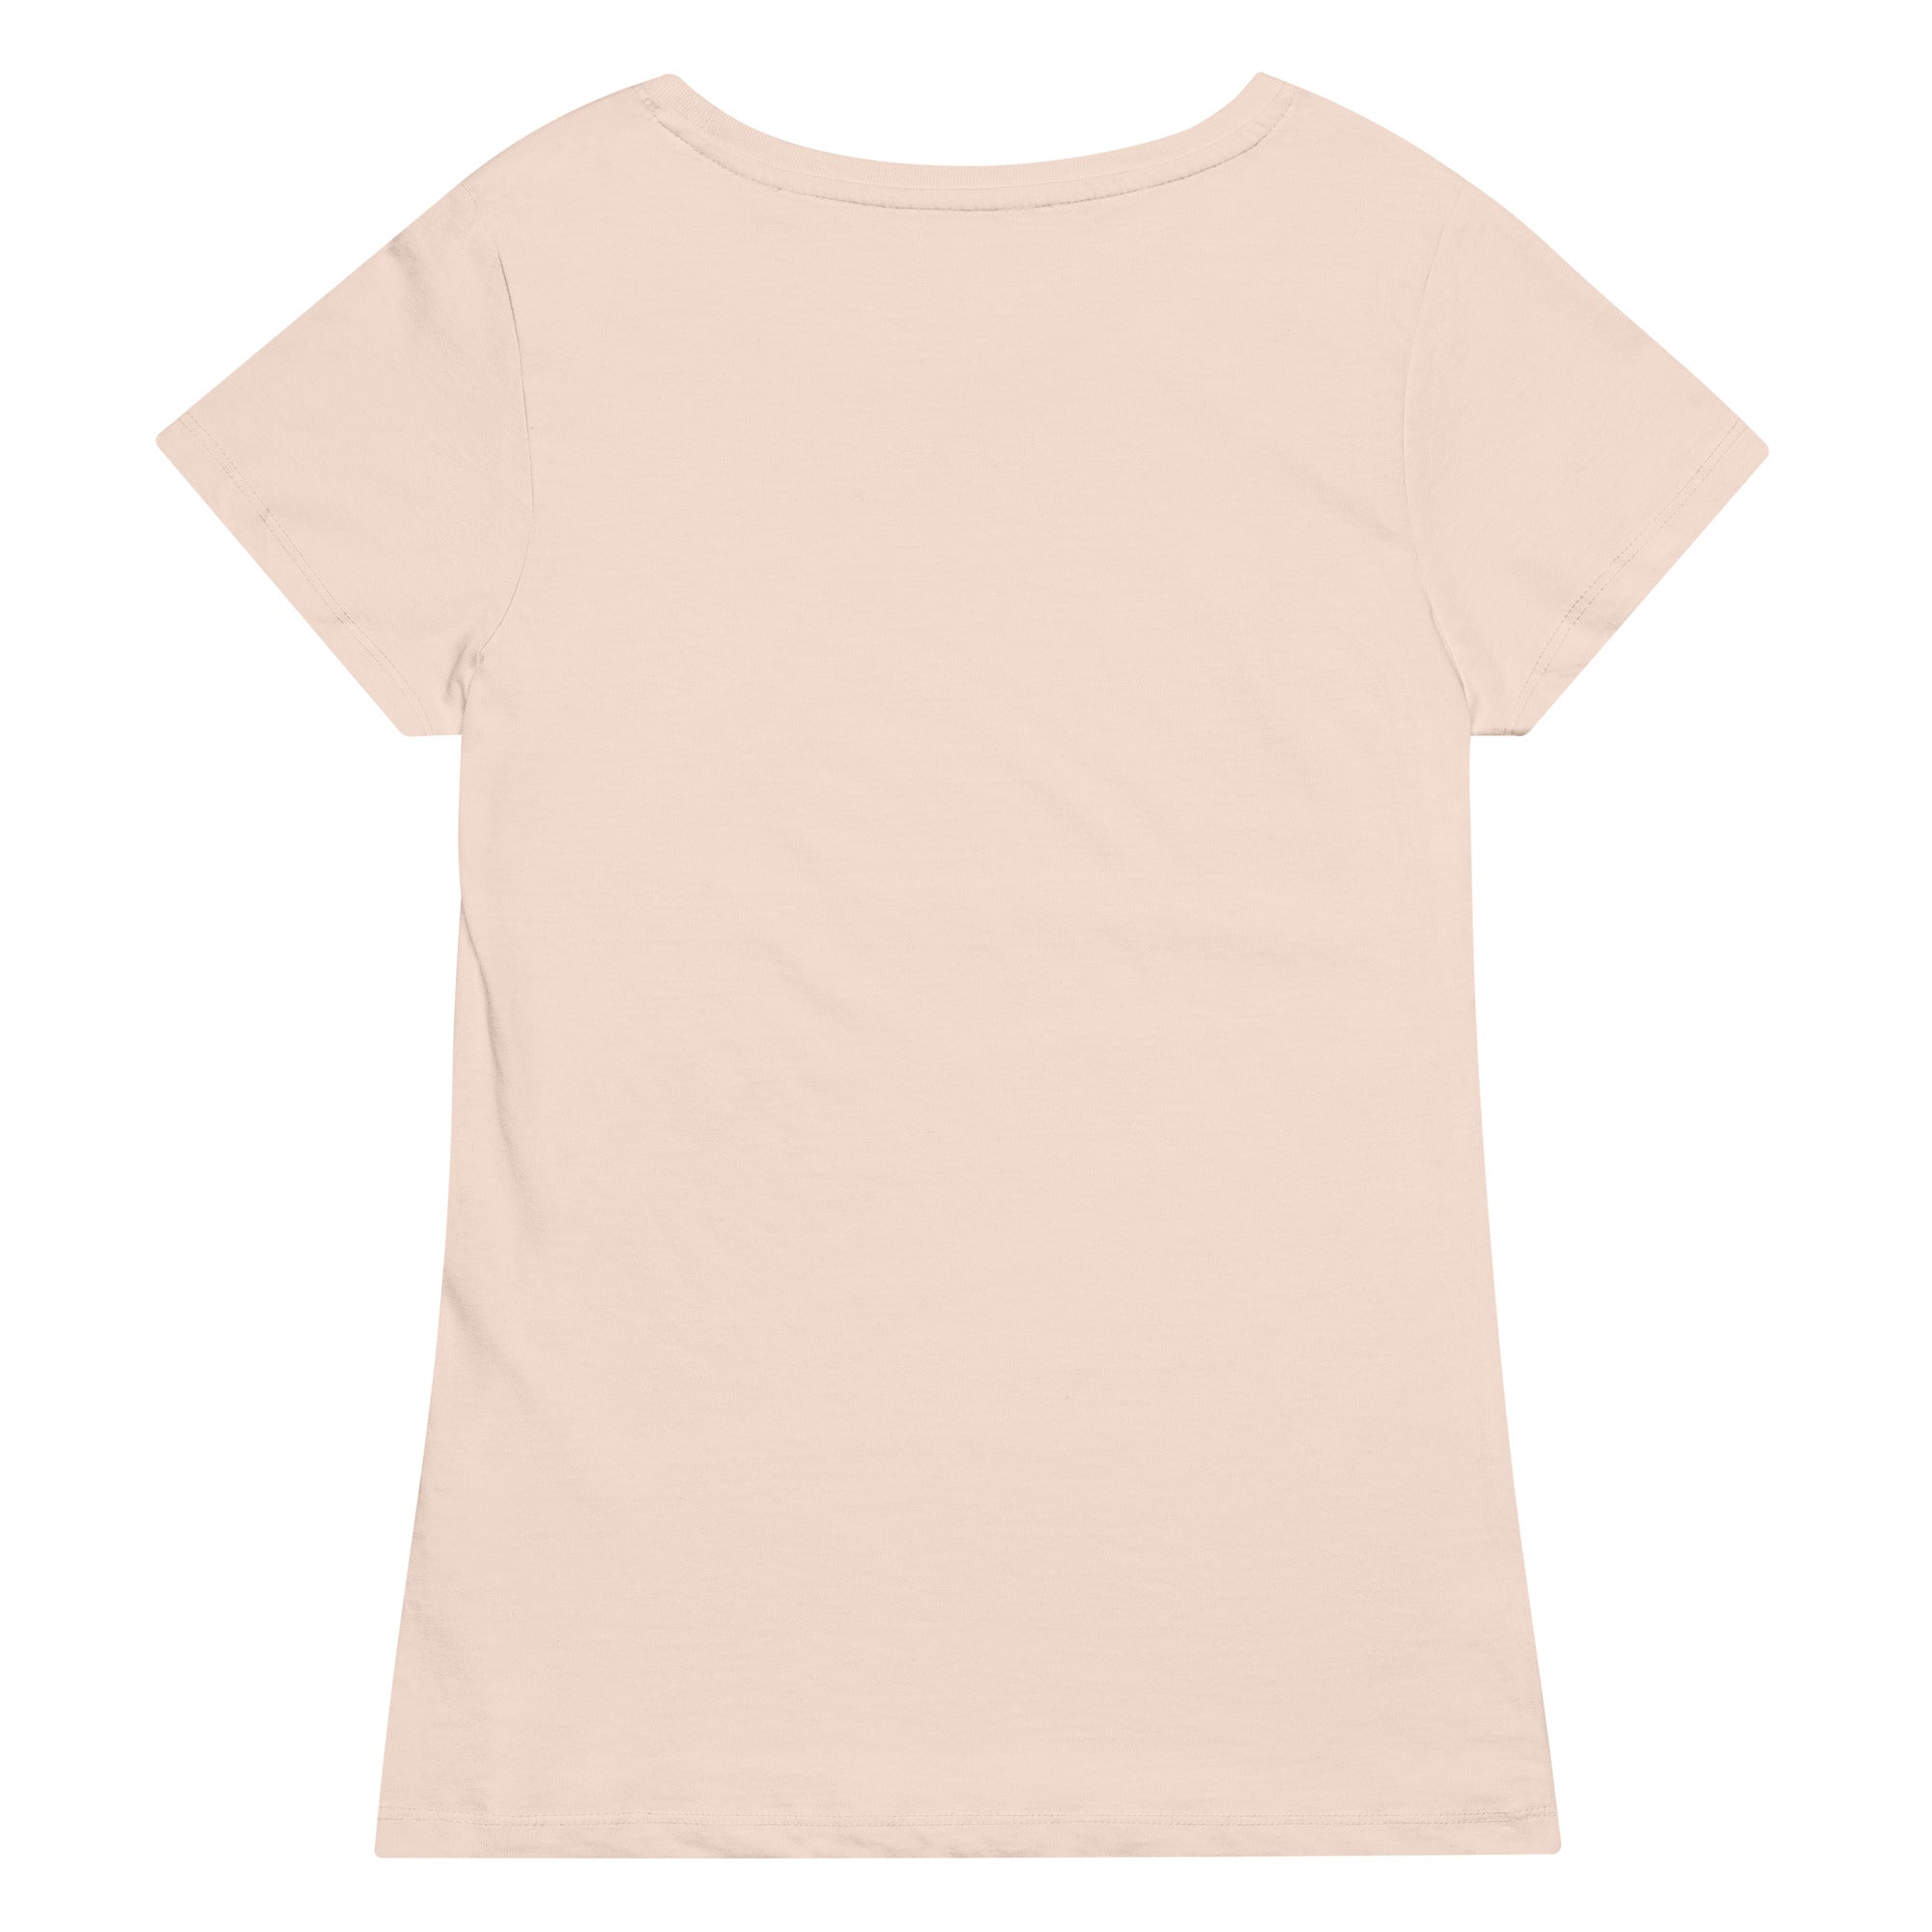 Women’s basic organic yoga t-shirt - PersonalHour Style - Personal Hour for Yoga and Meditations 